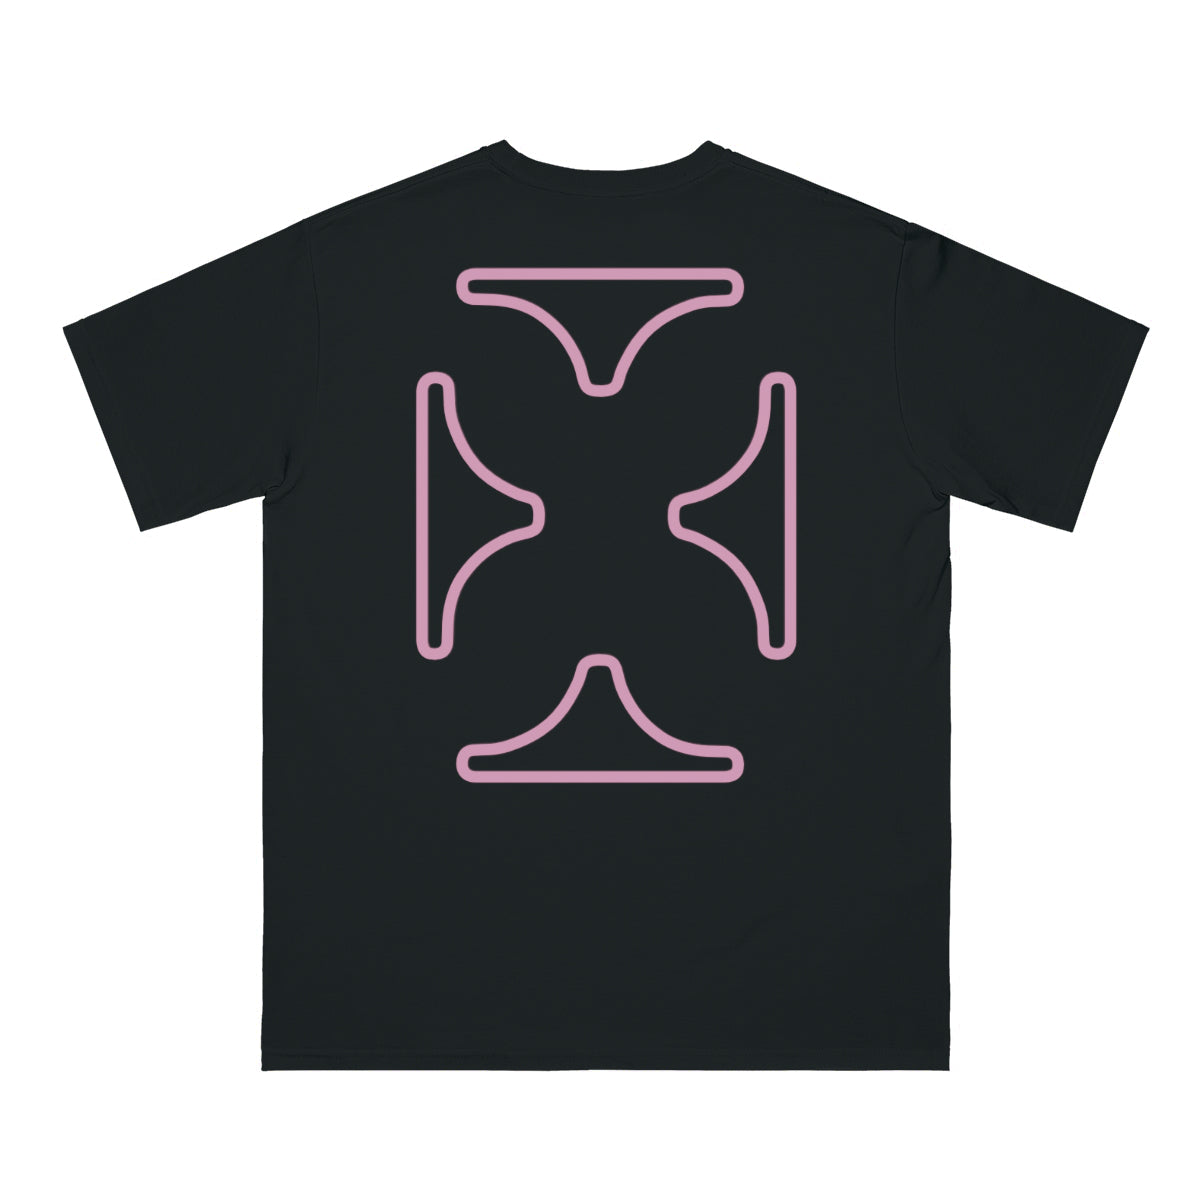 Back of Black Devoto T- shirt with Pink graphic